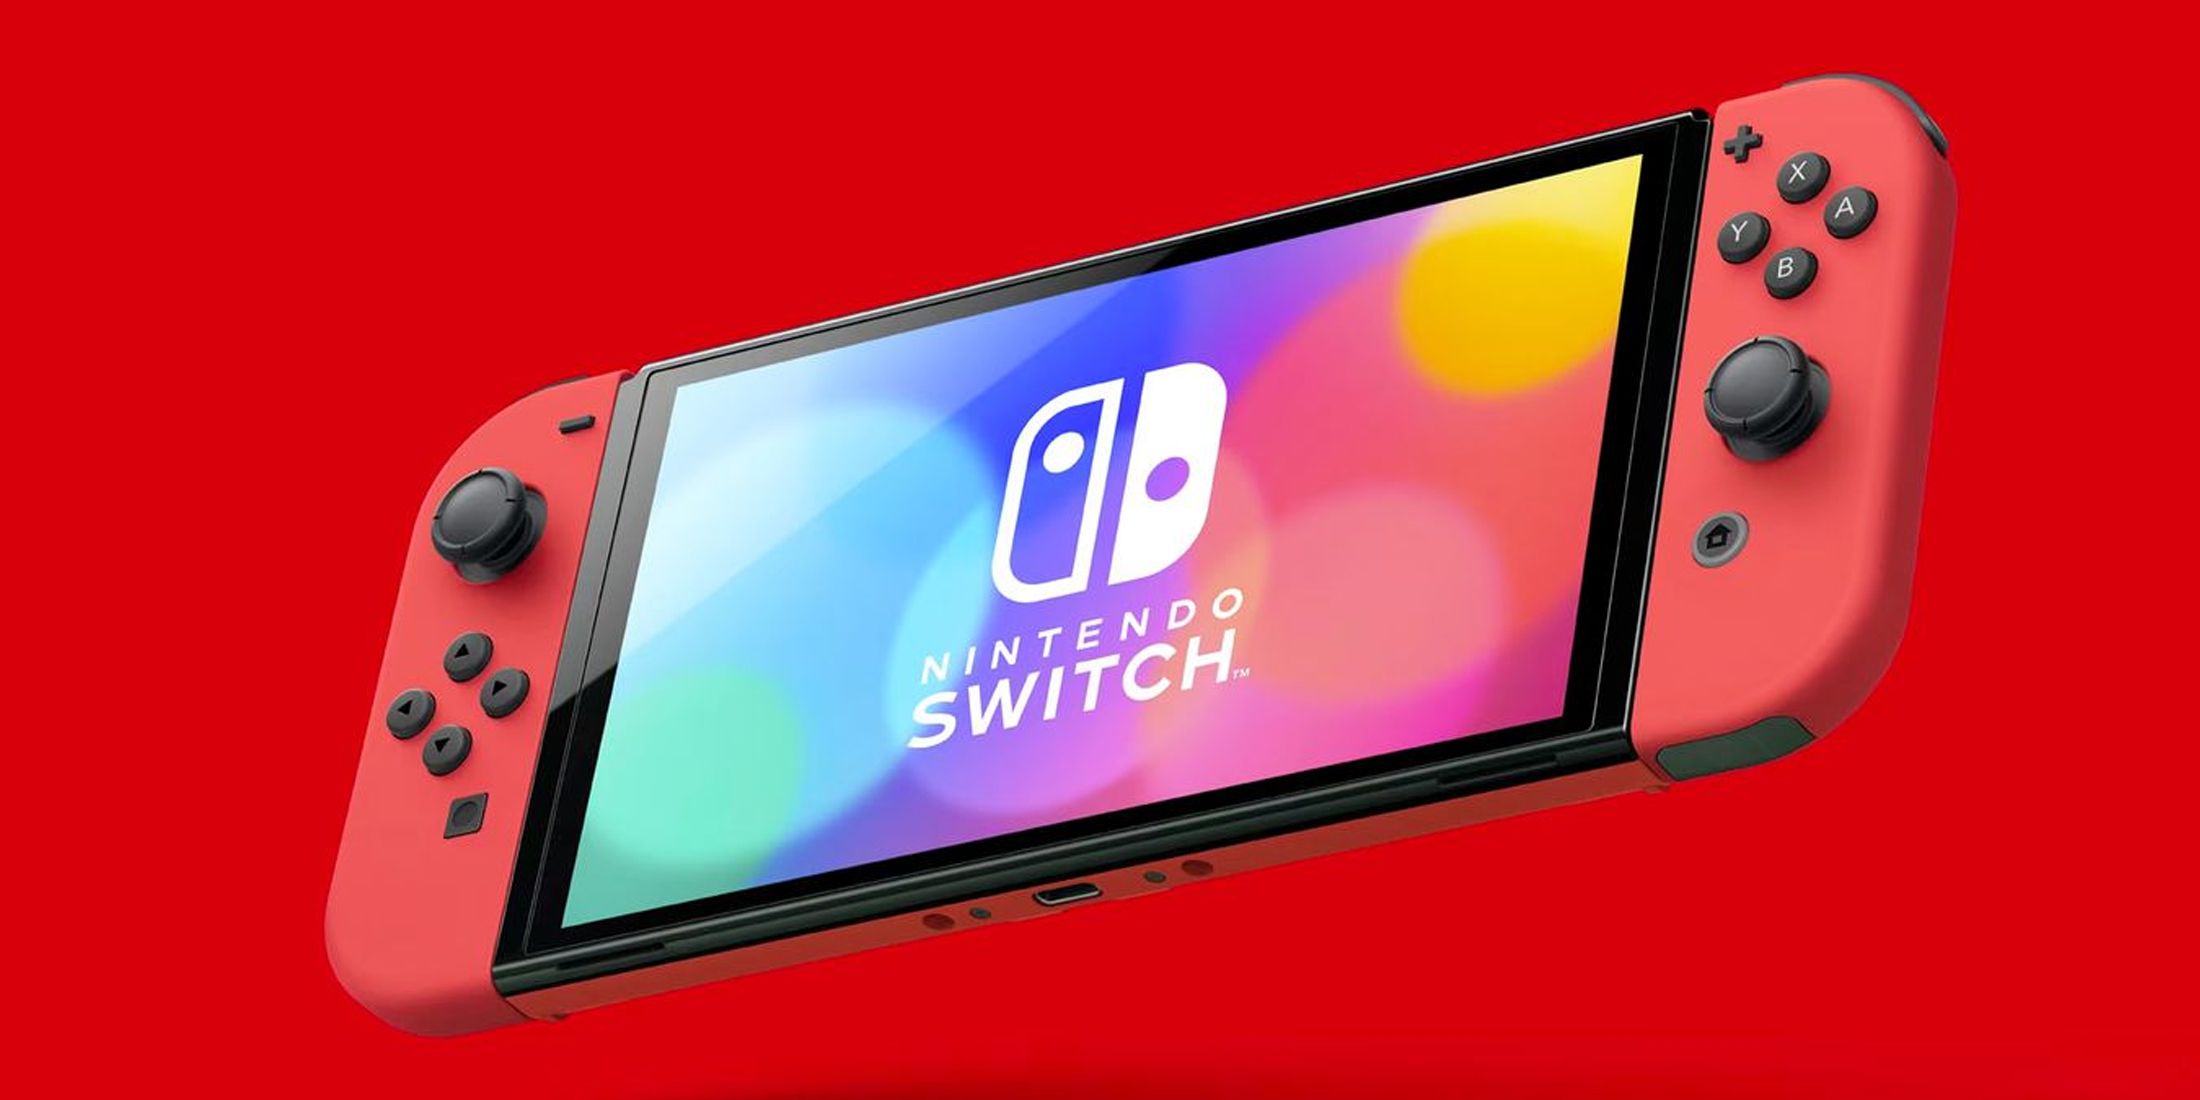 An image of a red Nintendo Switch set against a red background.